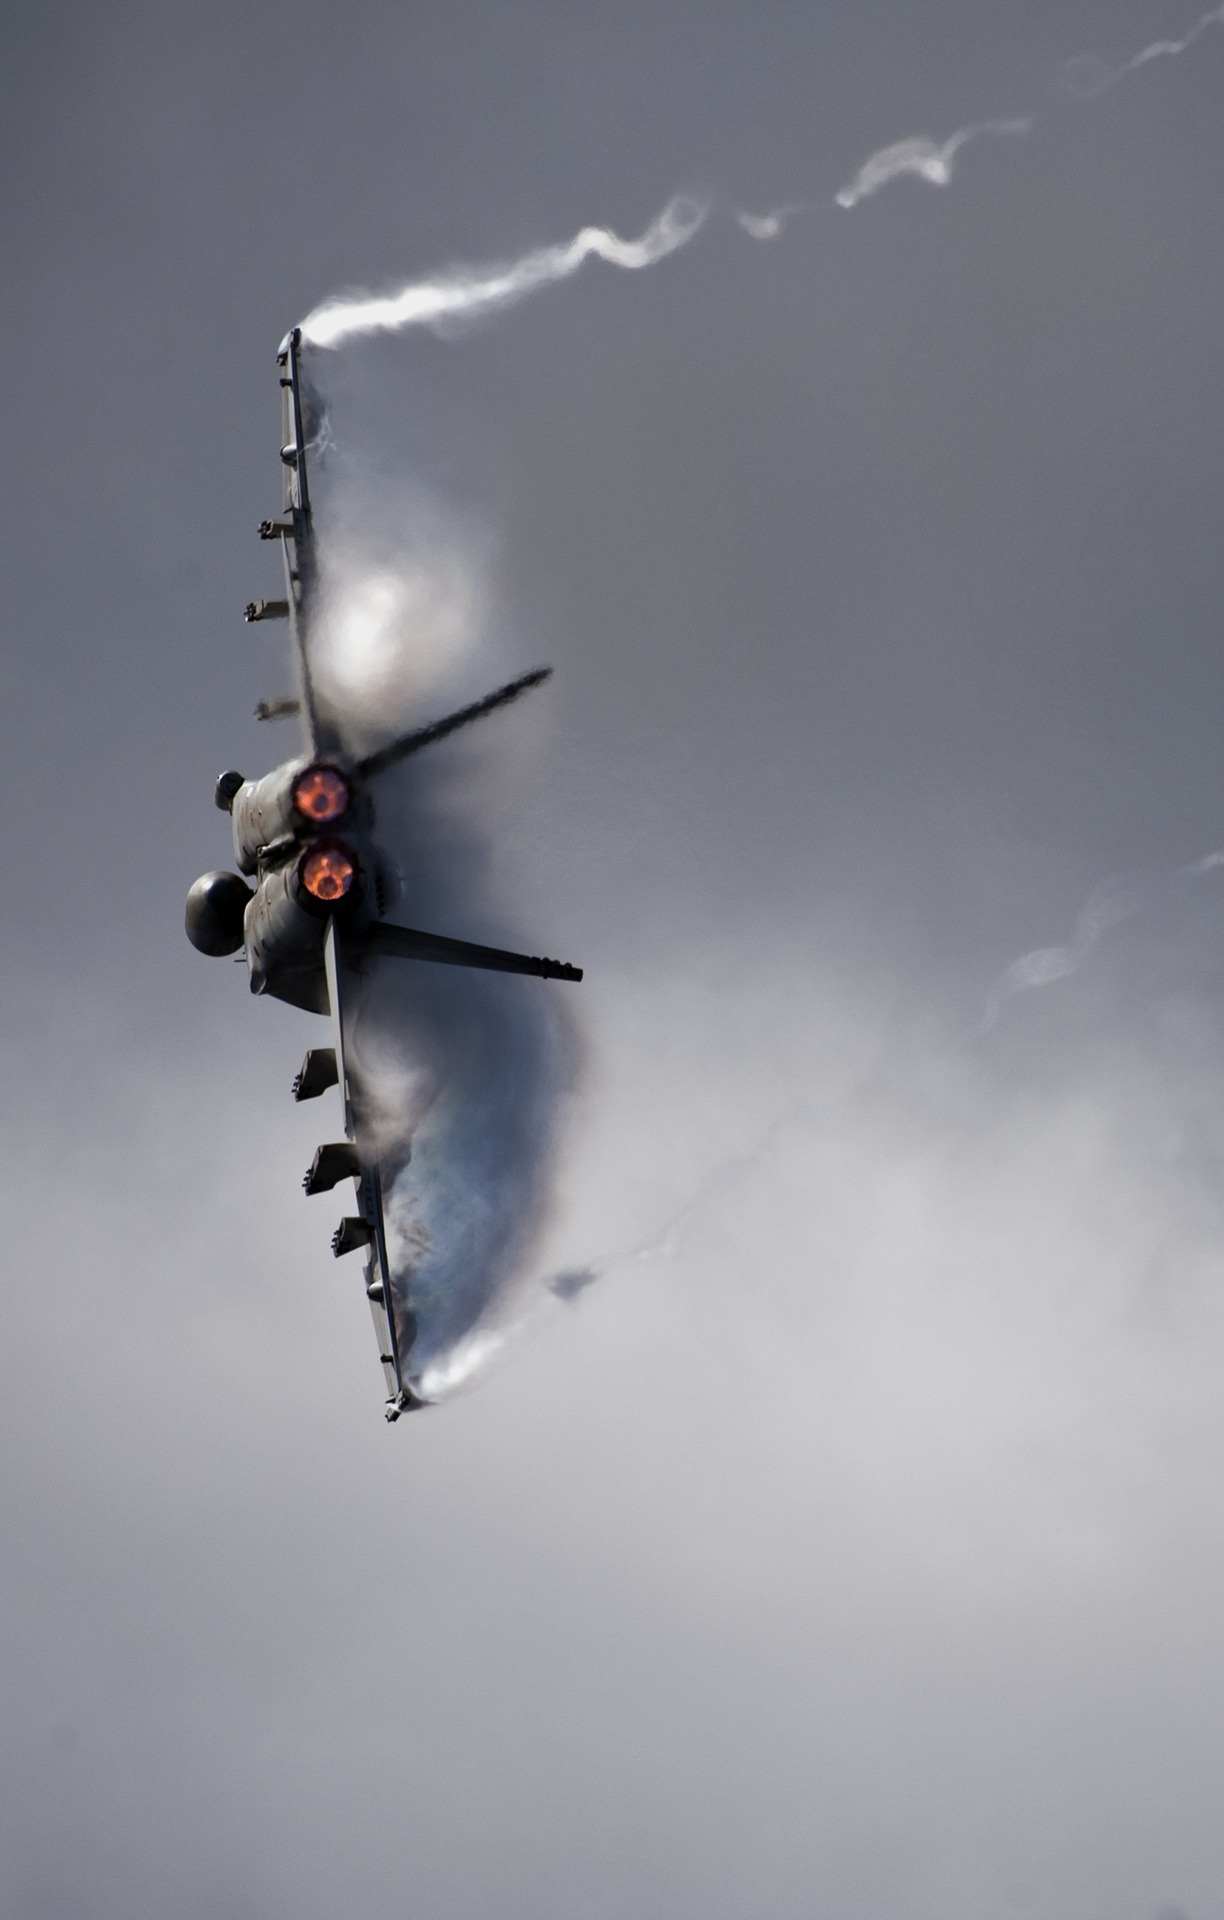 Don’t need candles on my birthday today, the two burners on this USN F/A-18E will do just fine!
PACIFIC OCEAN (June 6, 2011) An F/A-18E Super Hornet assigned to Strike Fighter Squadron (VFA) 81 maneuvers during an air power demonstration over the...